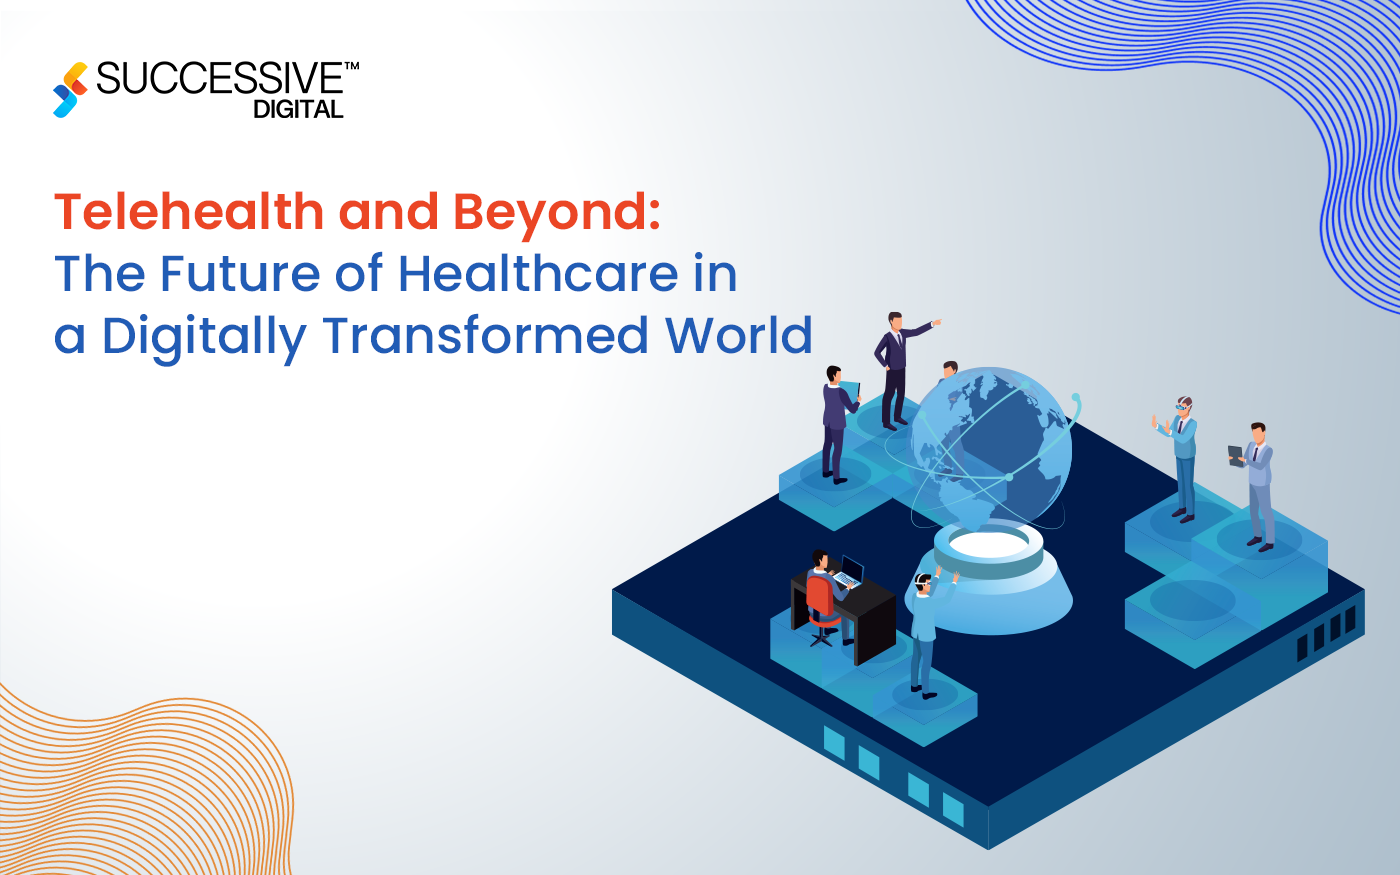 Telehealth and Beyond: The Future of Healthcare in a Digitally Transformed World